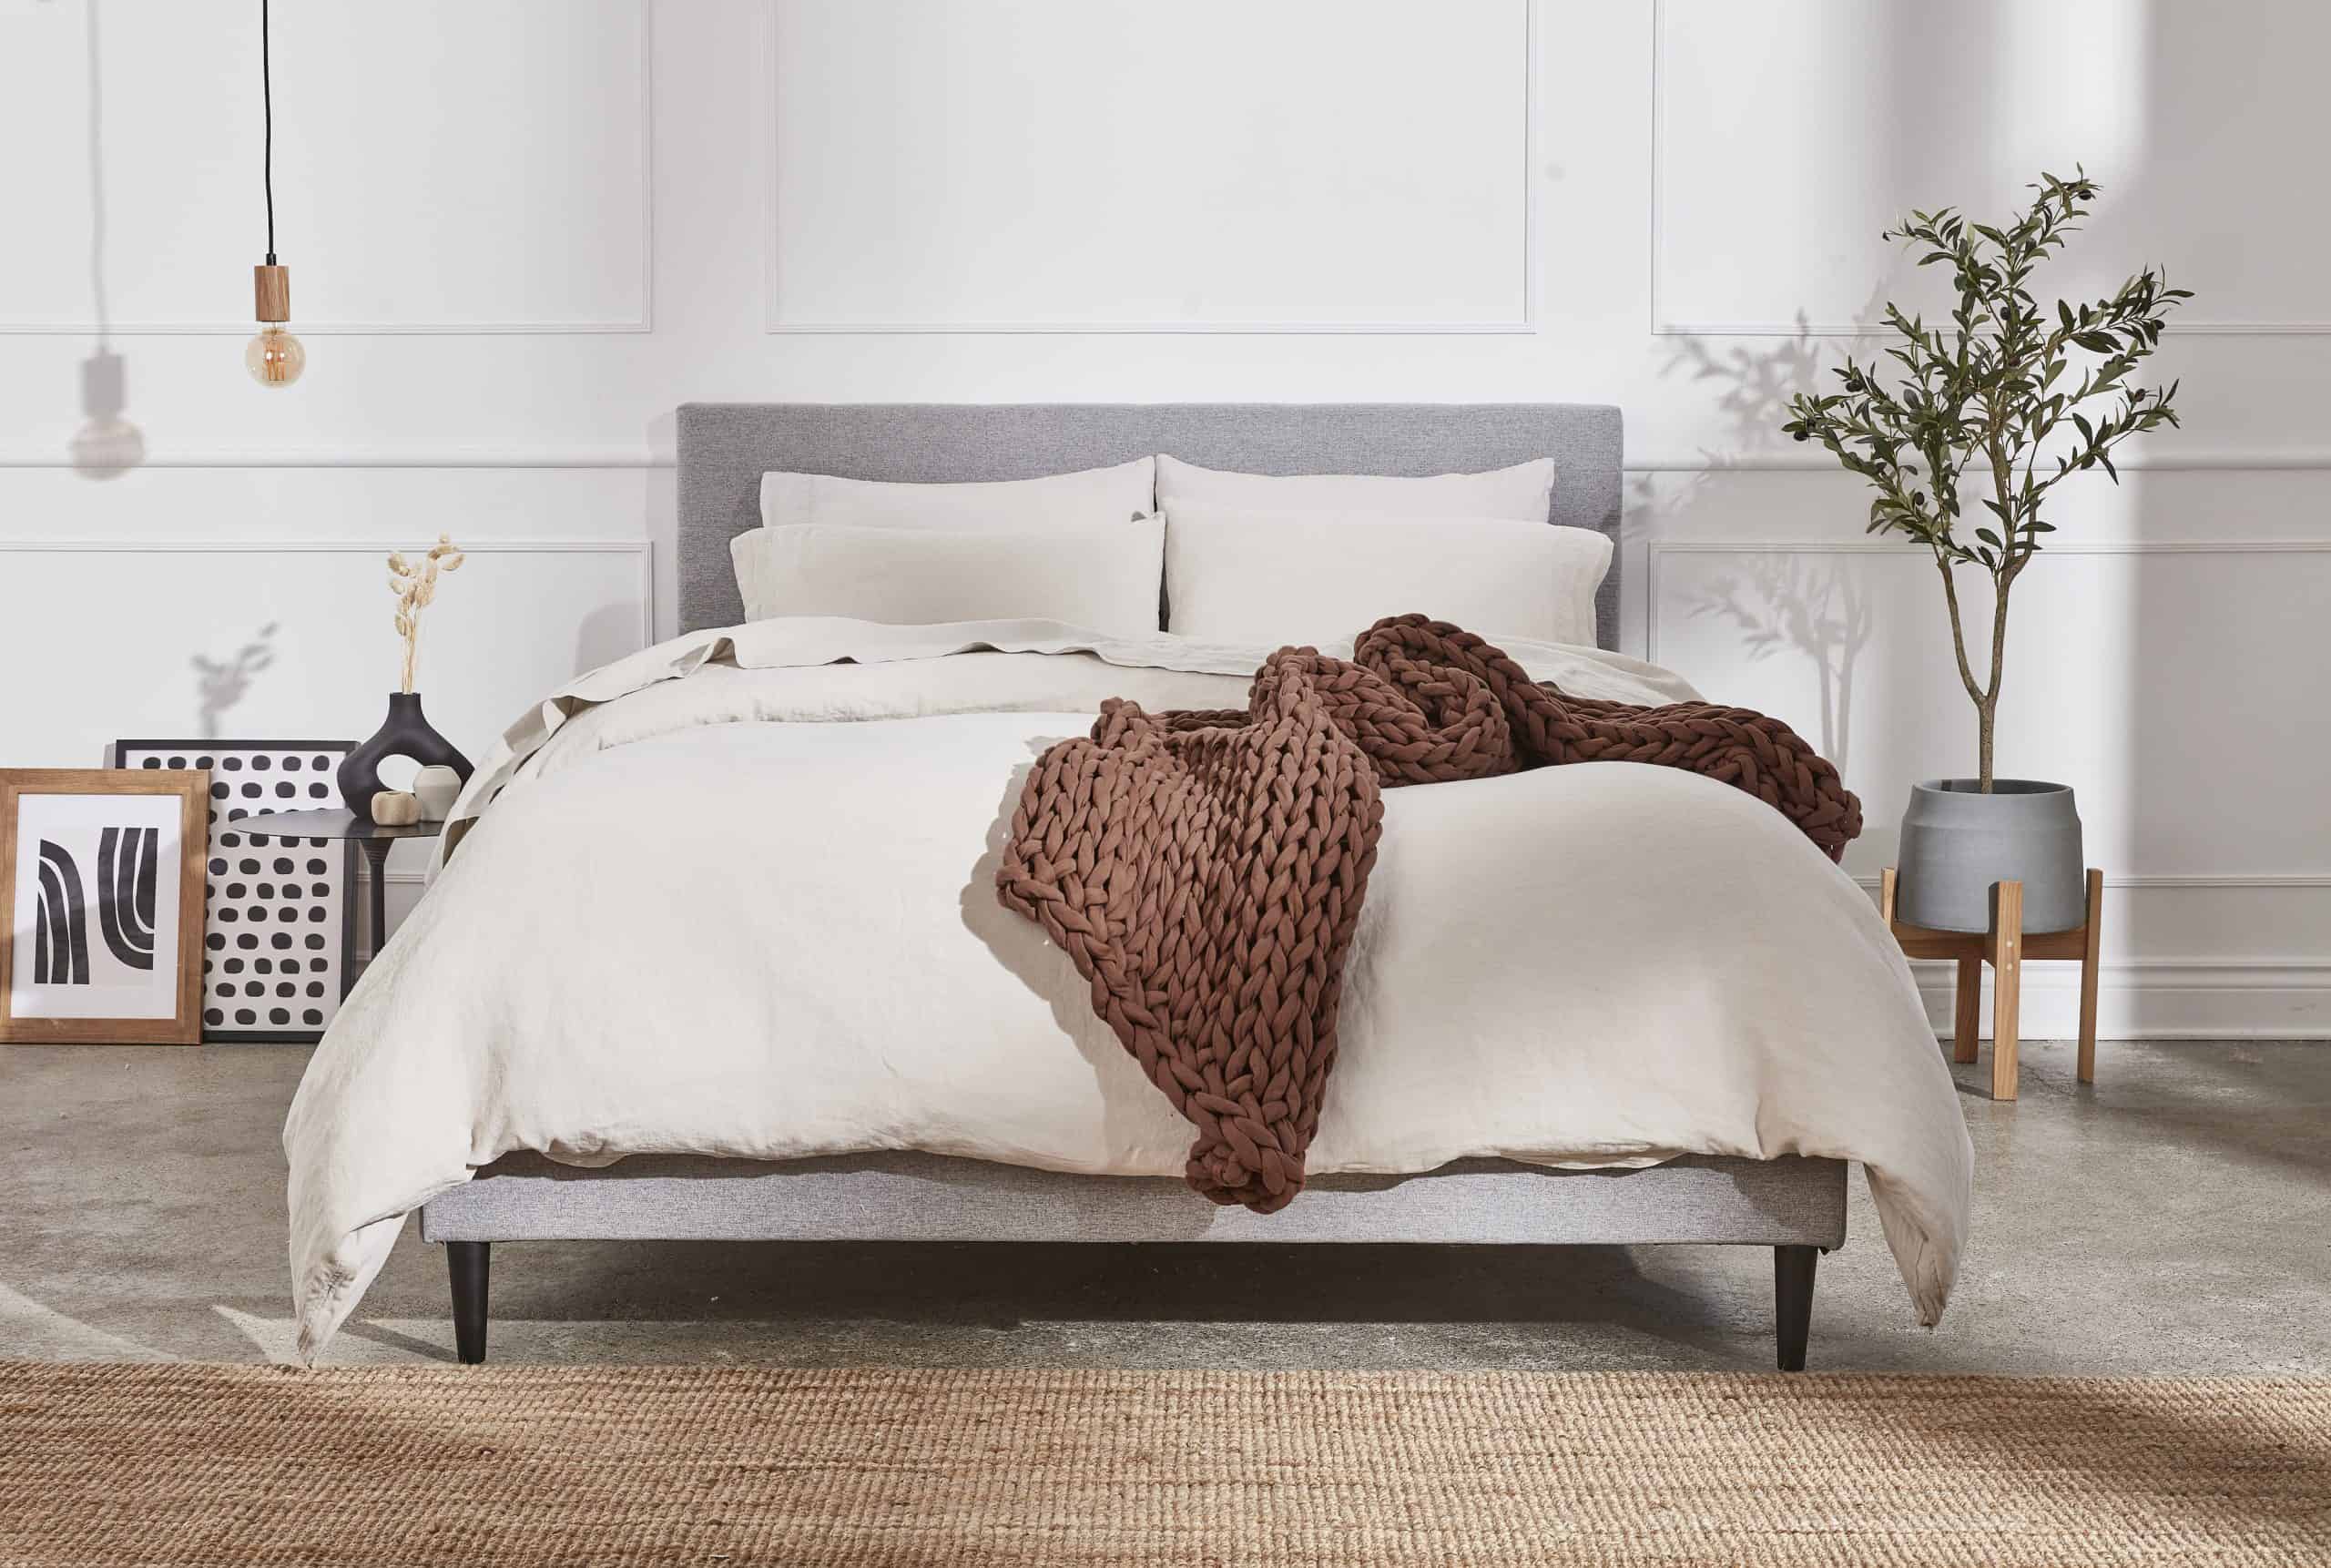 A brown weighted blanket drapes over a made bed in white bed sheets.